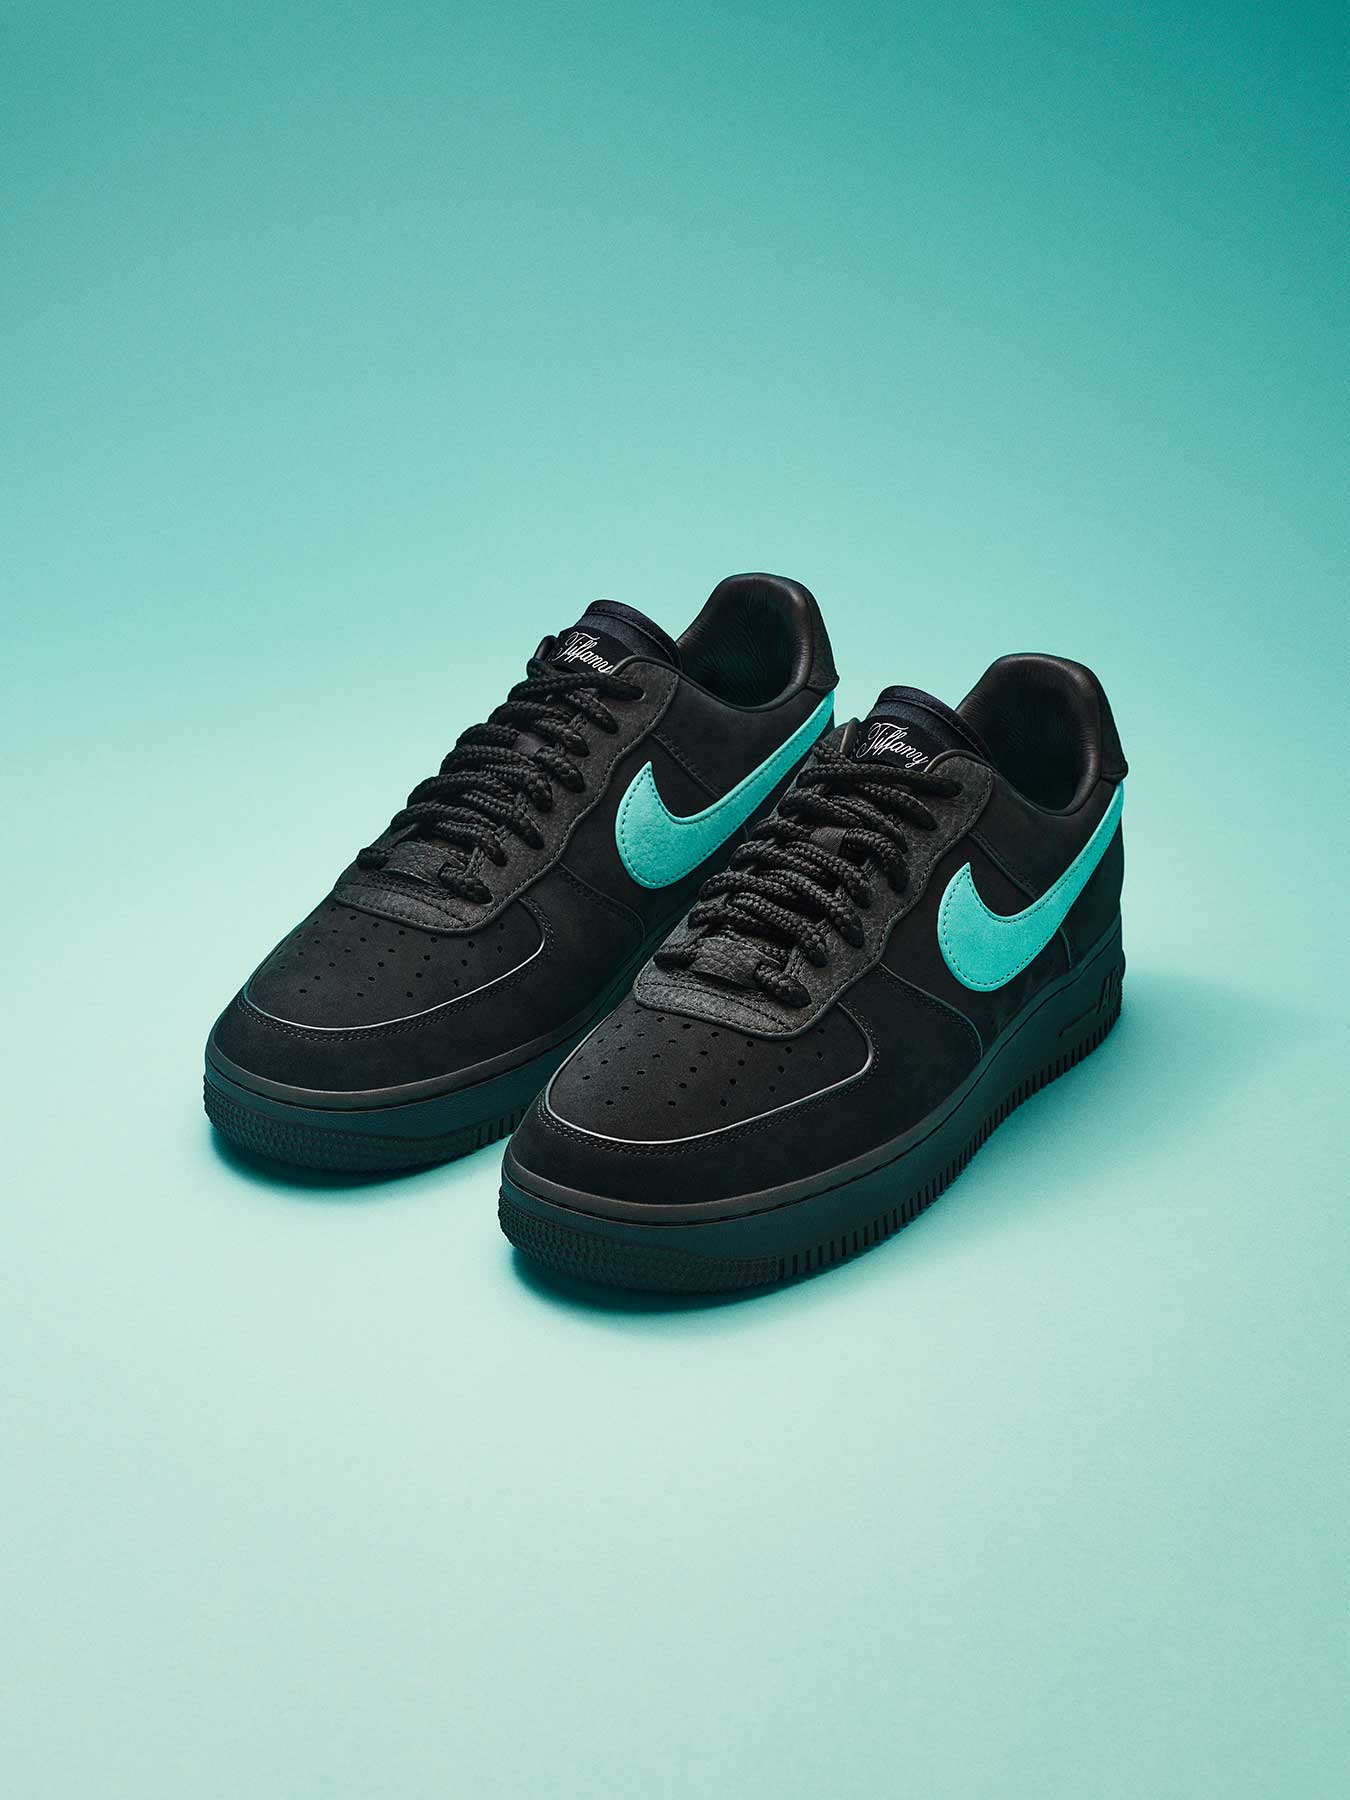 Tiffany's Nike AF1 Sneaker Is Good, Actually